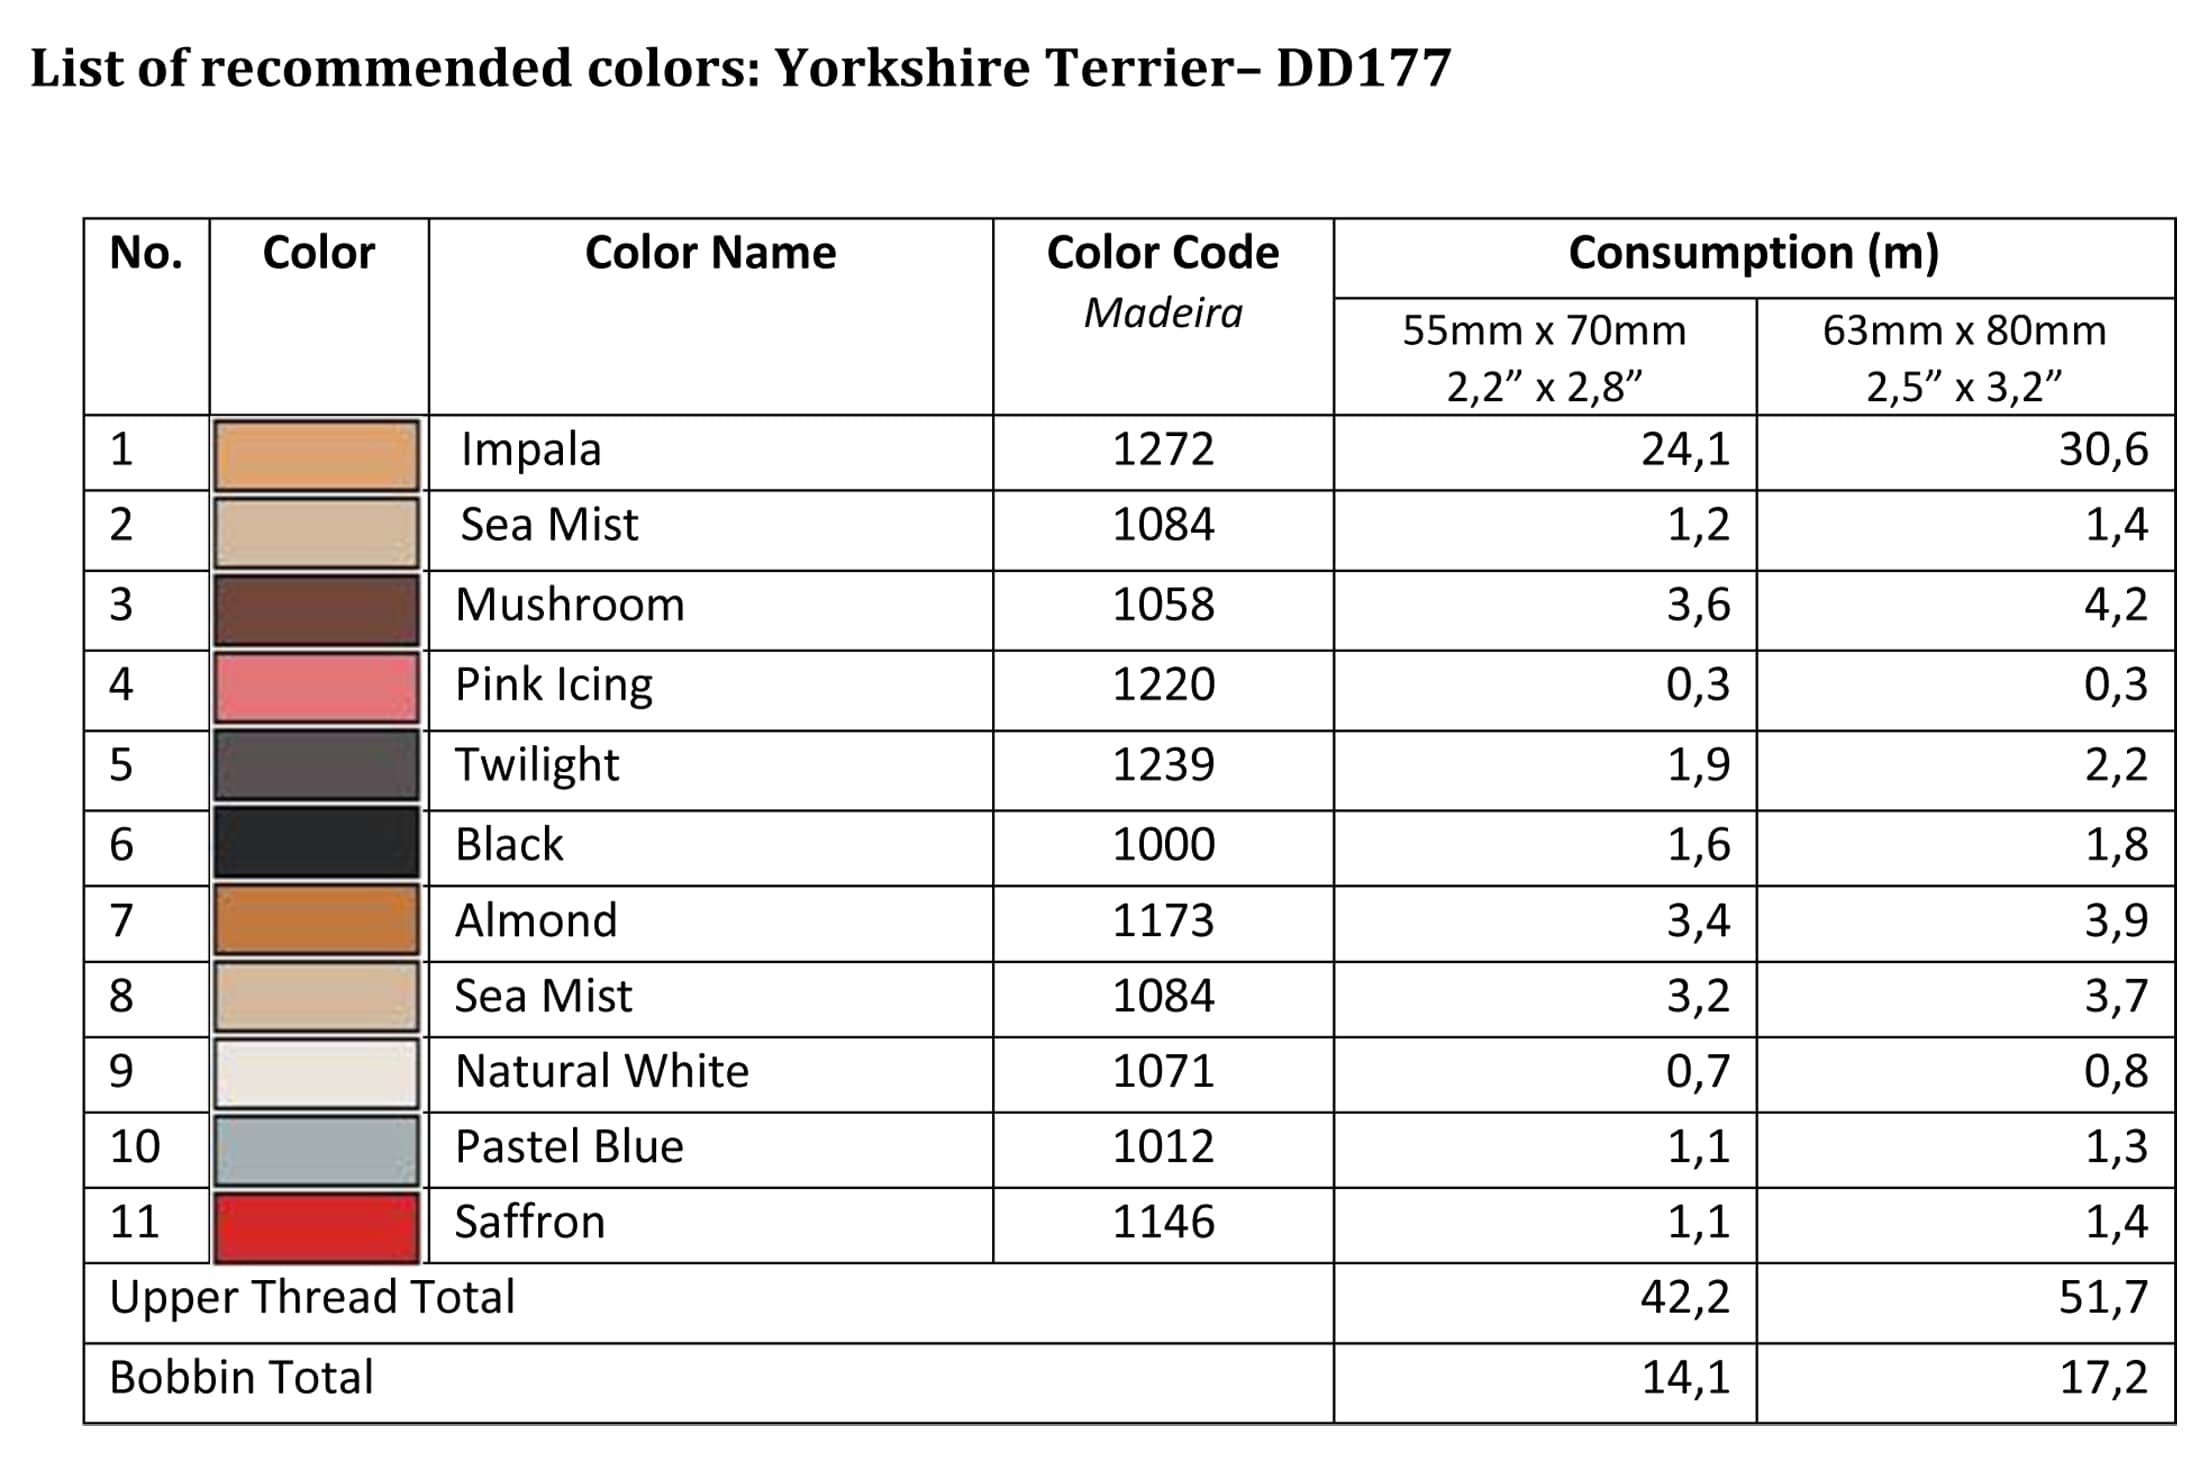 List of recommended colors - DD177